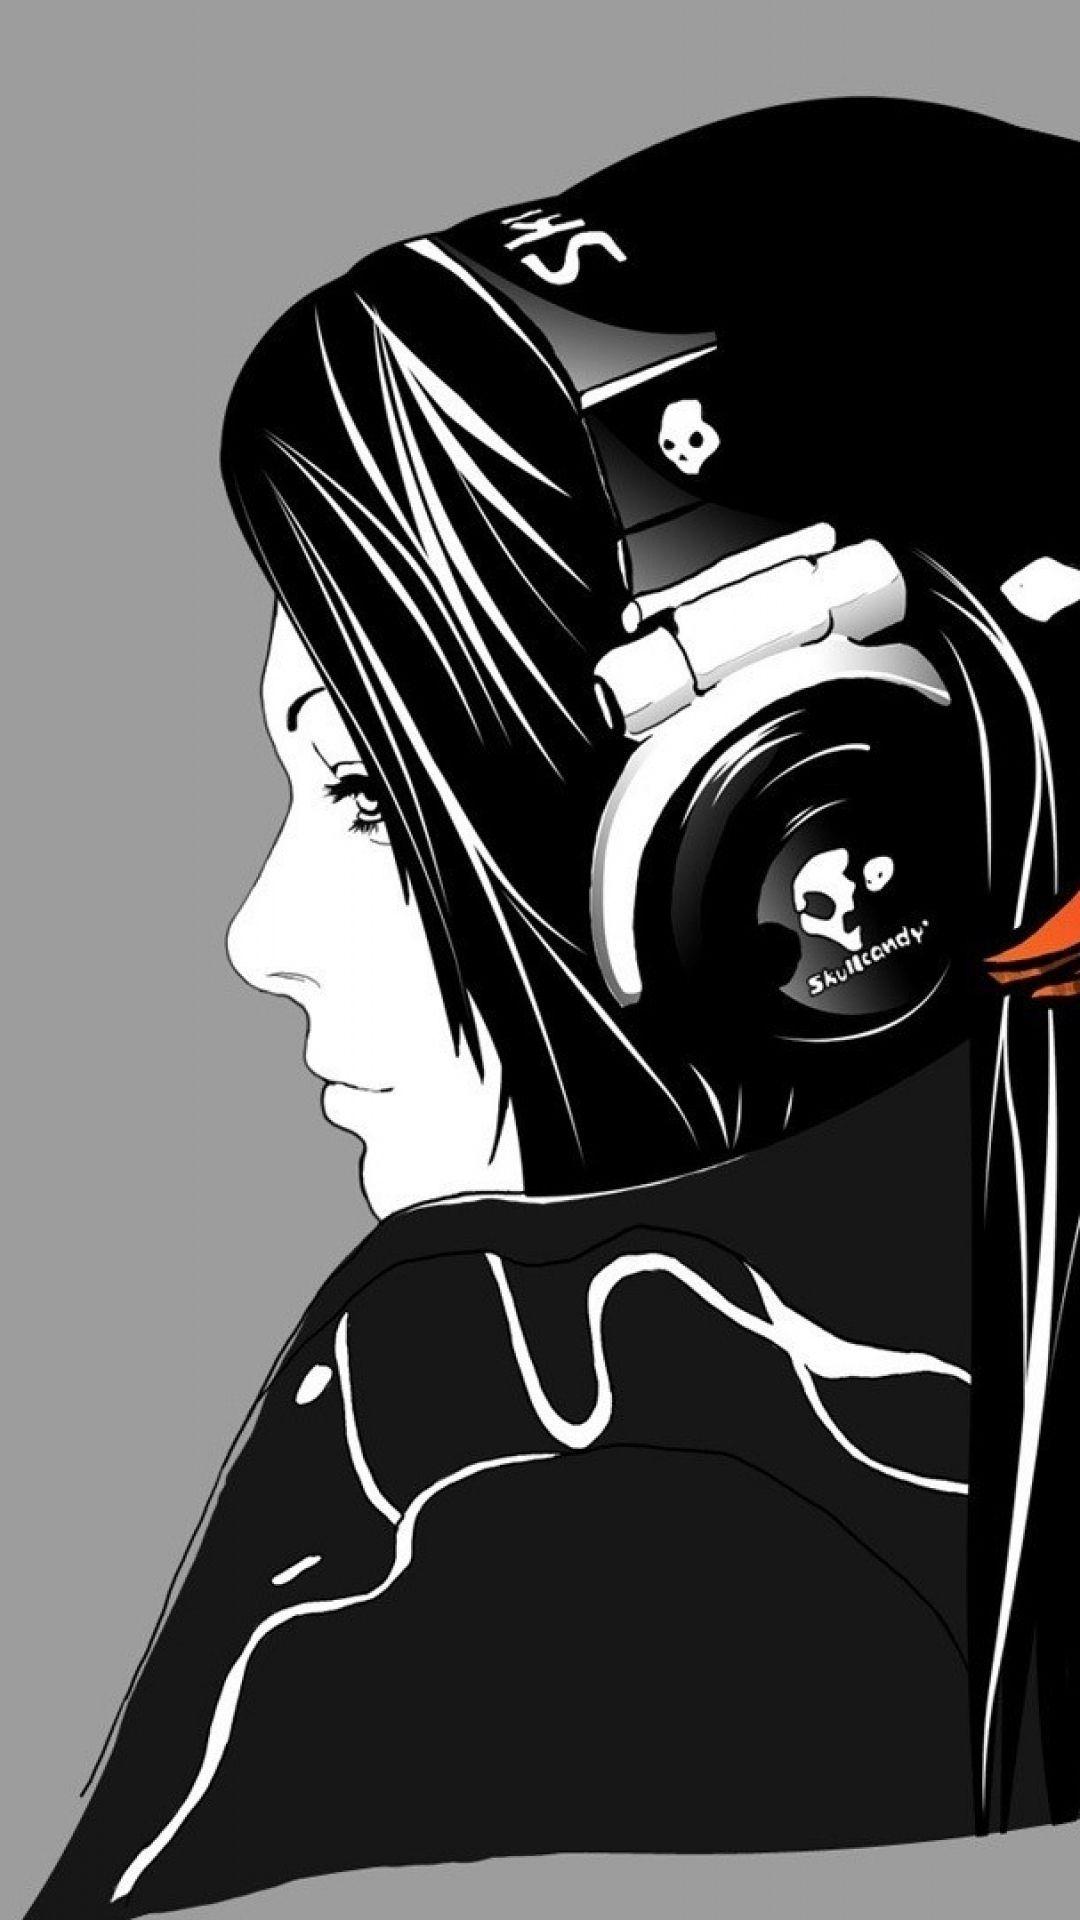 MUSIC IPHONE WALLPAPERS FOR THE MUSIC LOVERS.. Style. Music wallpaper, Girl with headphones, Headphones art